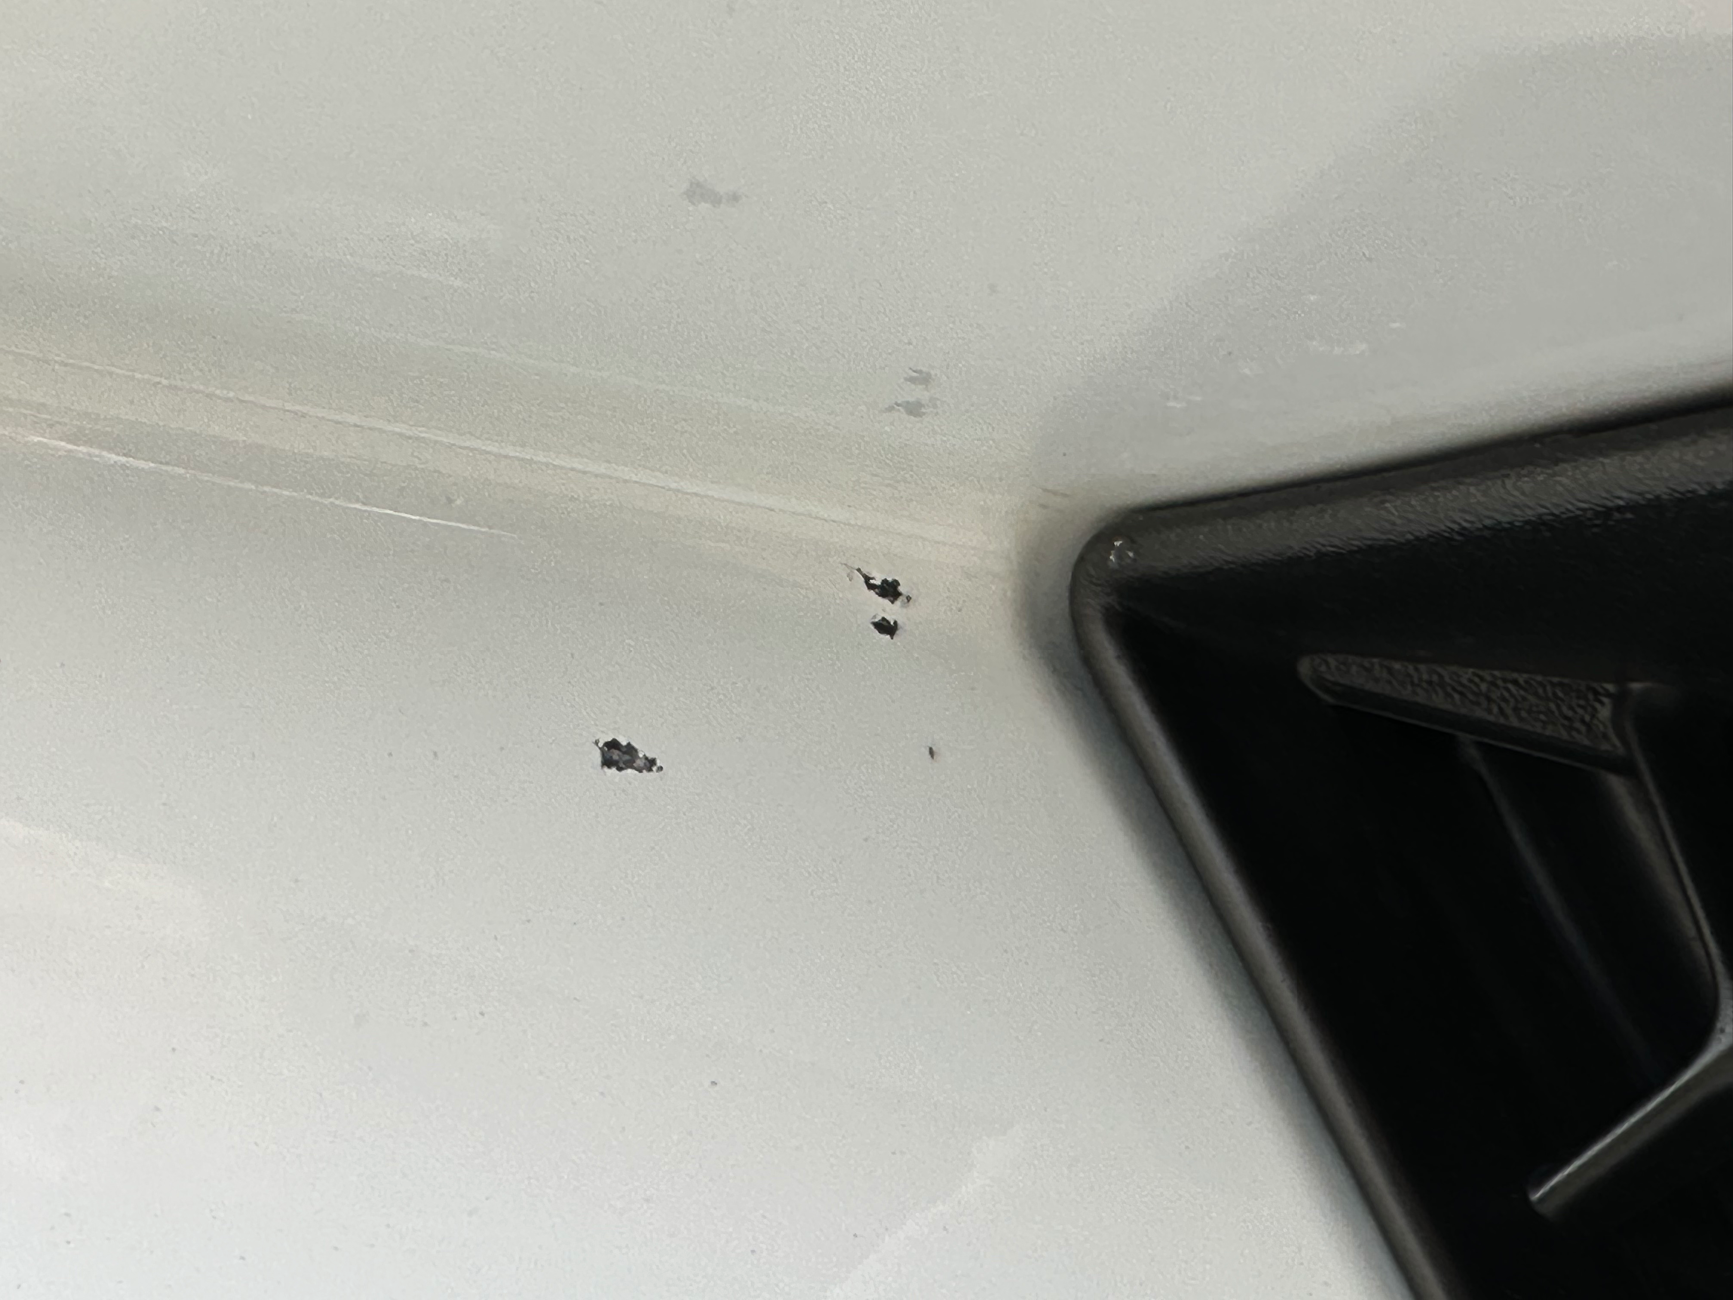 S650 Mustang Paint issues? tempImageTUsUZW